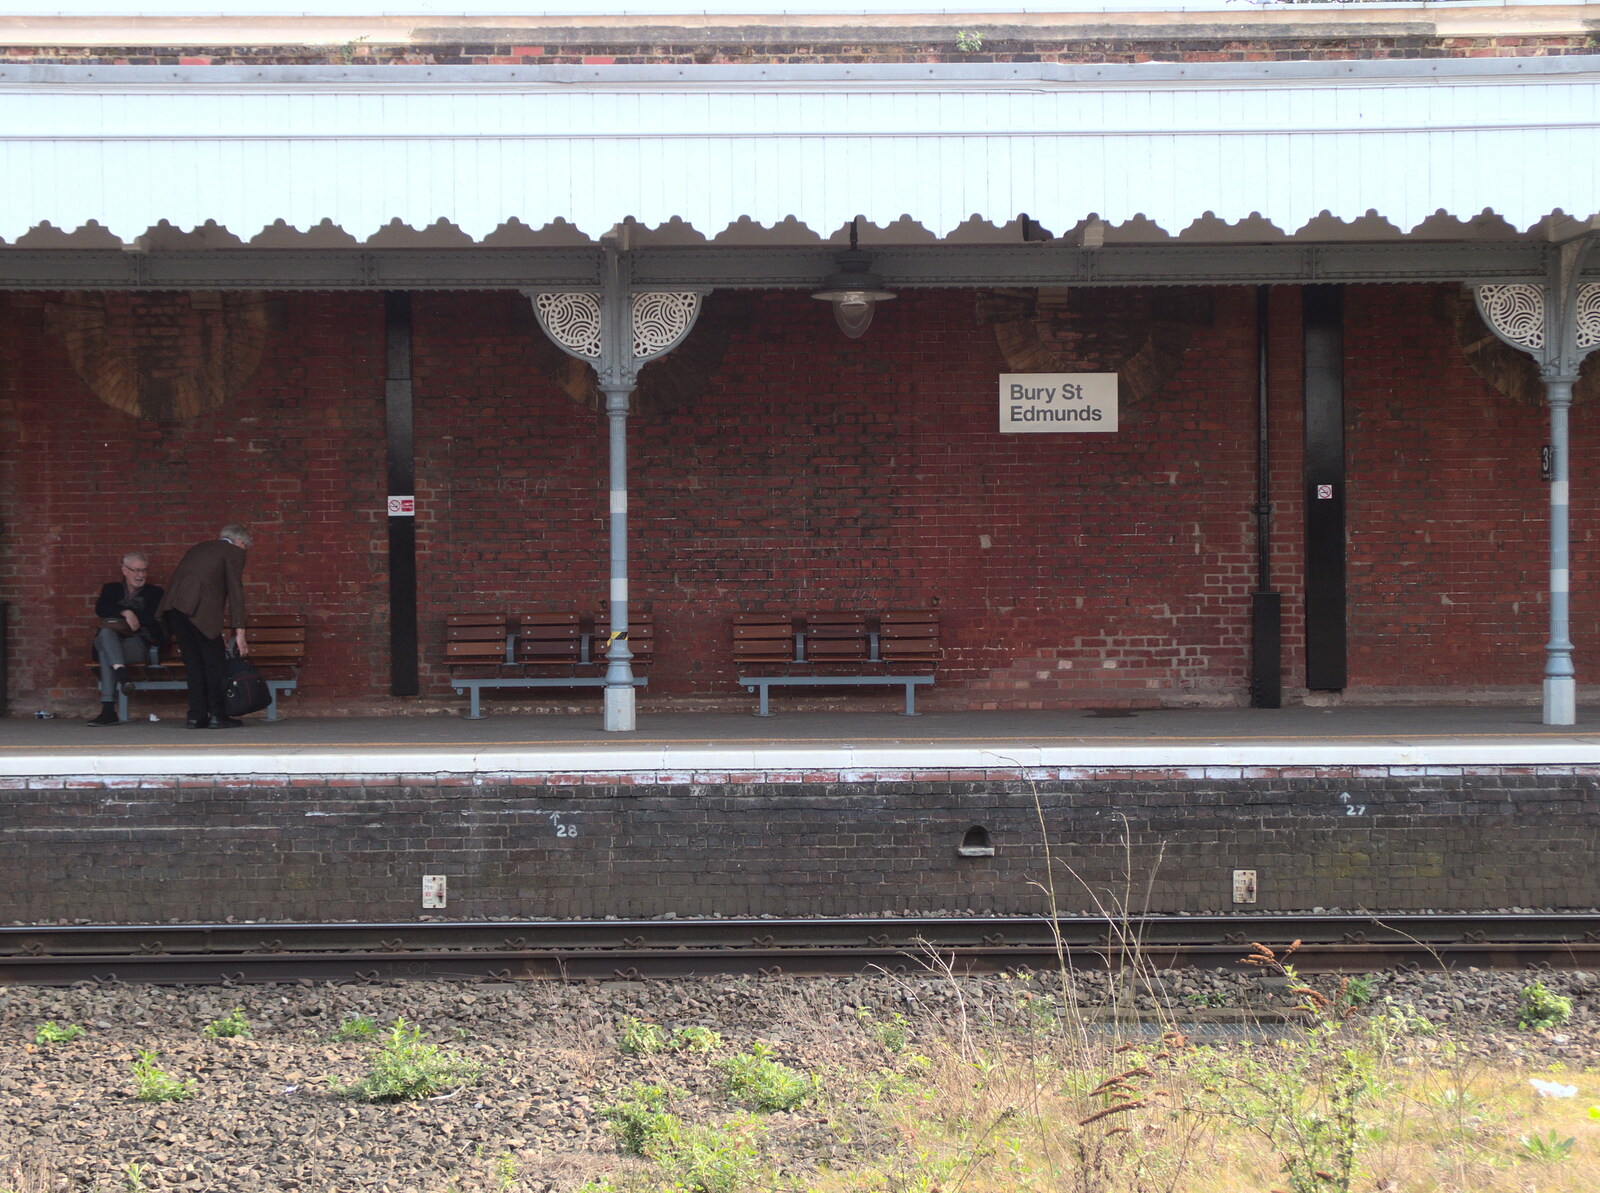 The almost derelict platforms at Bury station from The East Anglian Beer Festival, Bury St. Edmunds, Suffolk - 21st April 2018